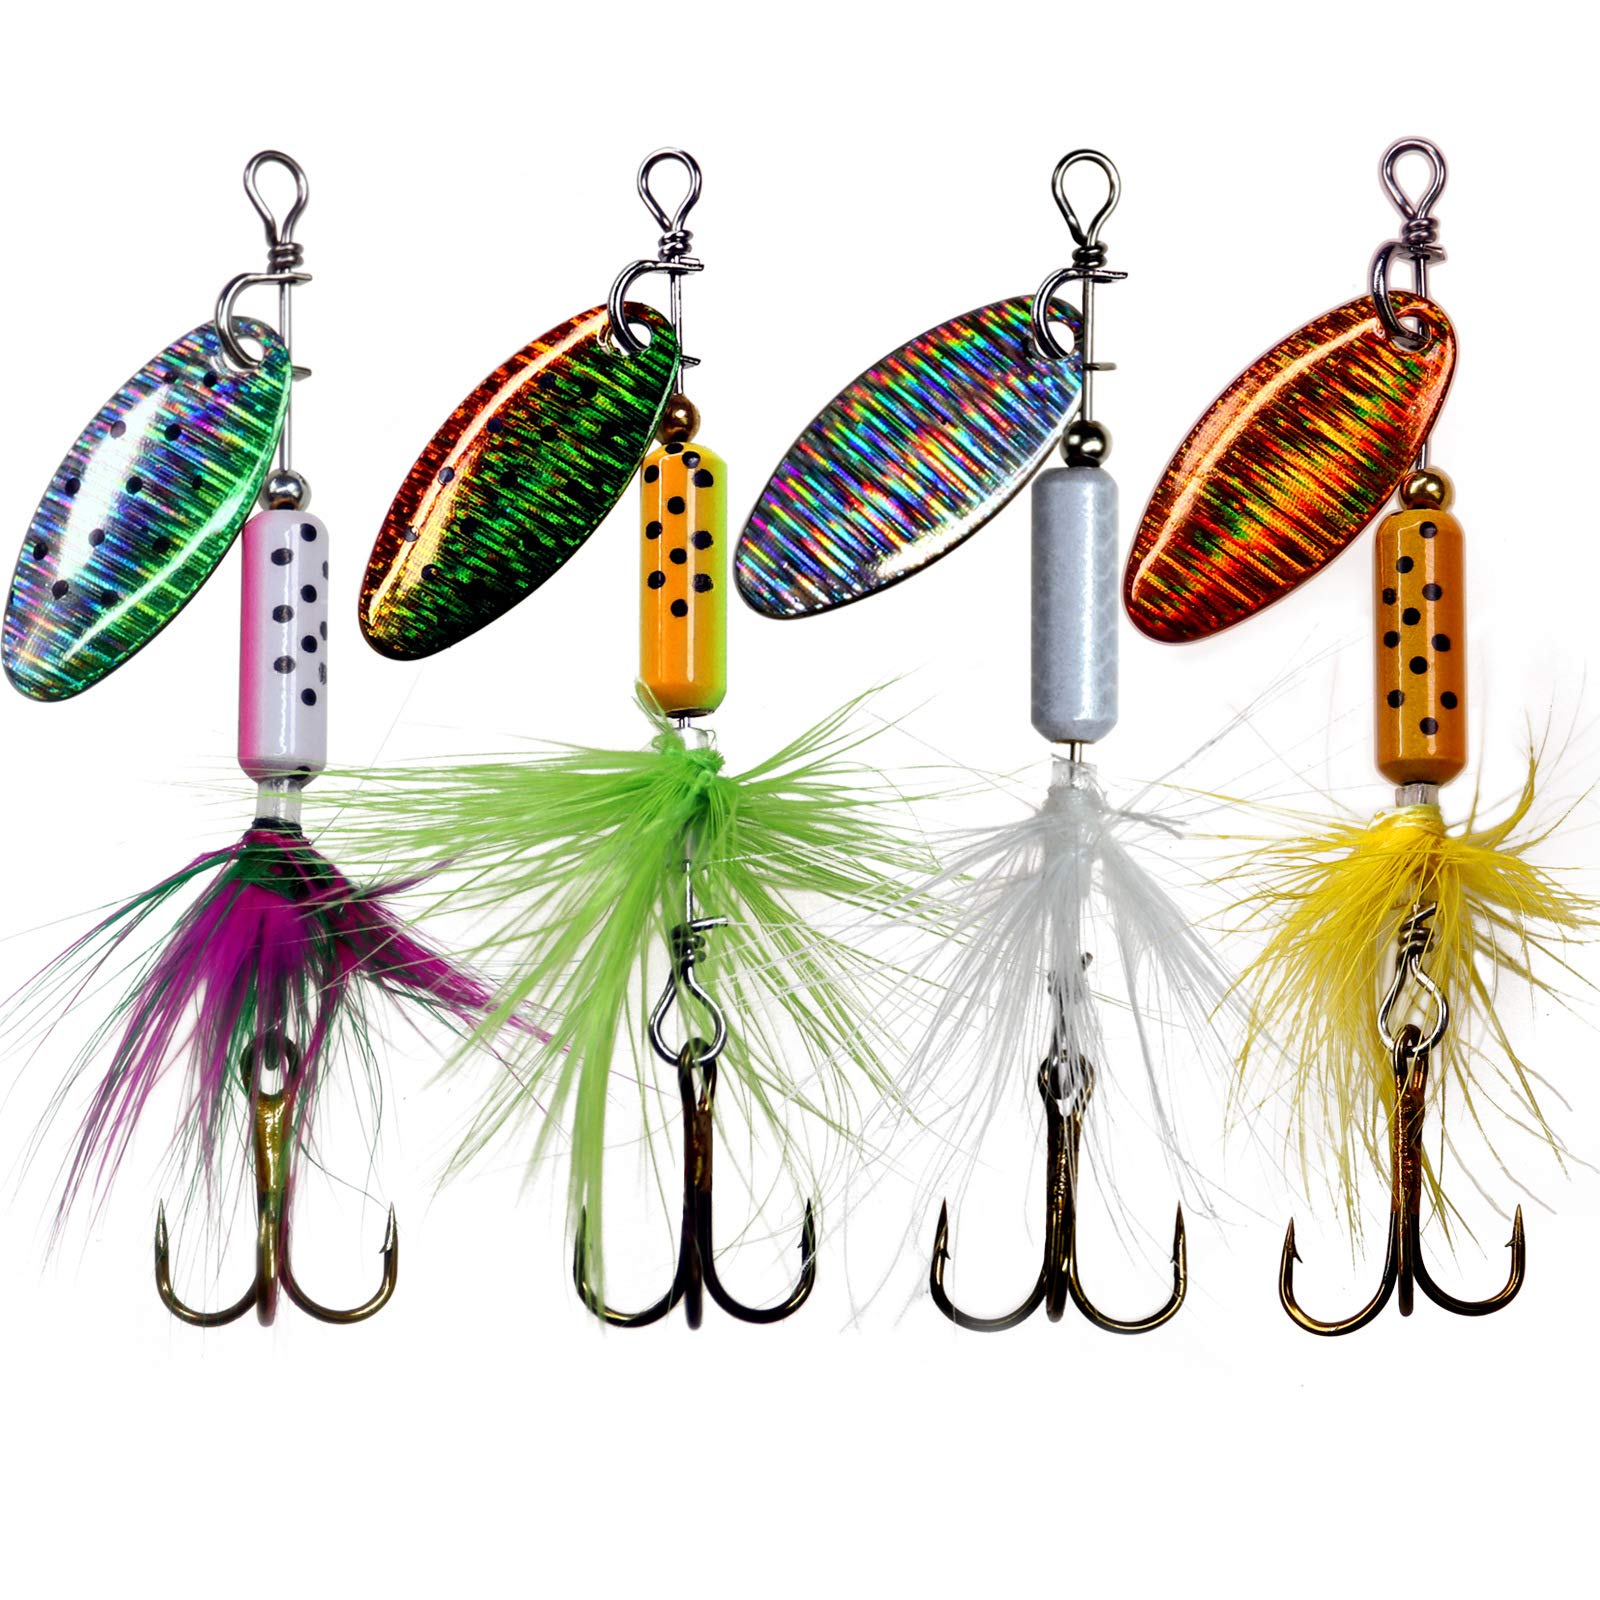 THKFISH Ice Fishing Lures - Complete Kit for Crappie Italy